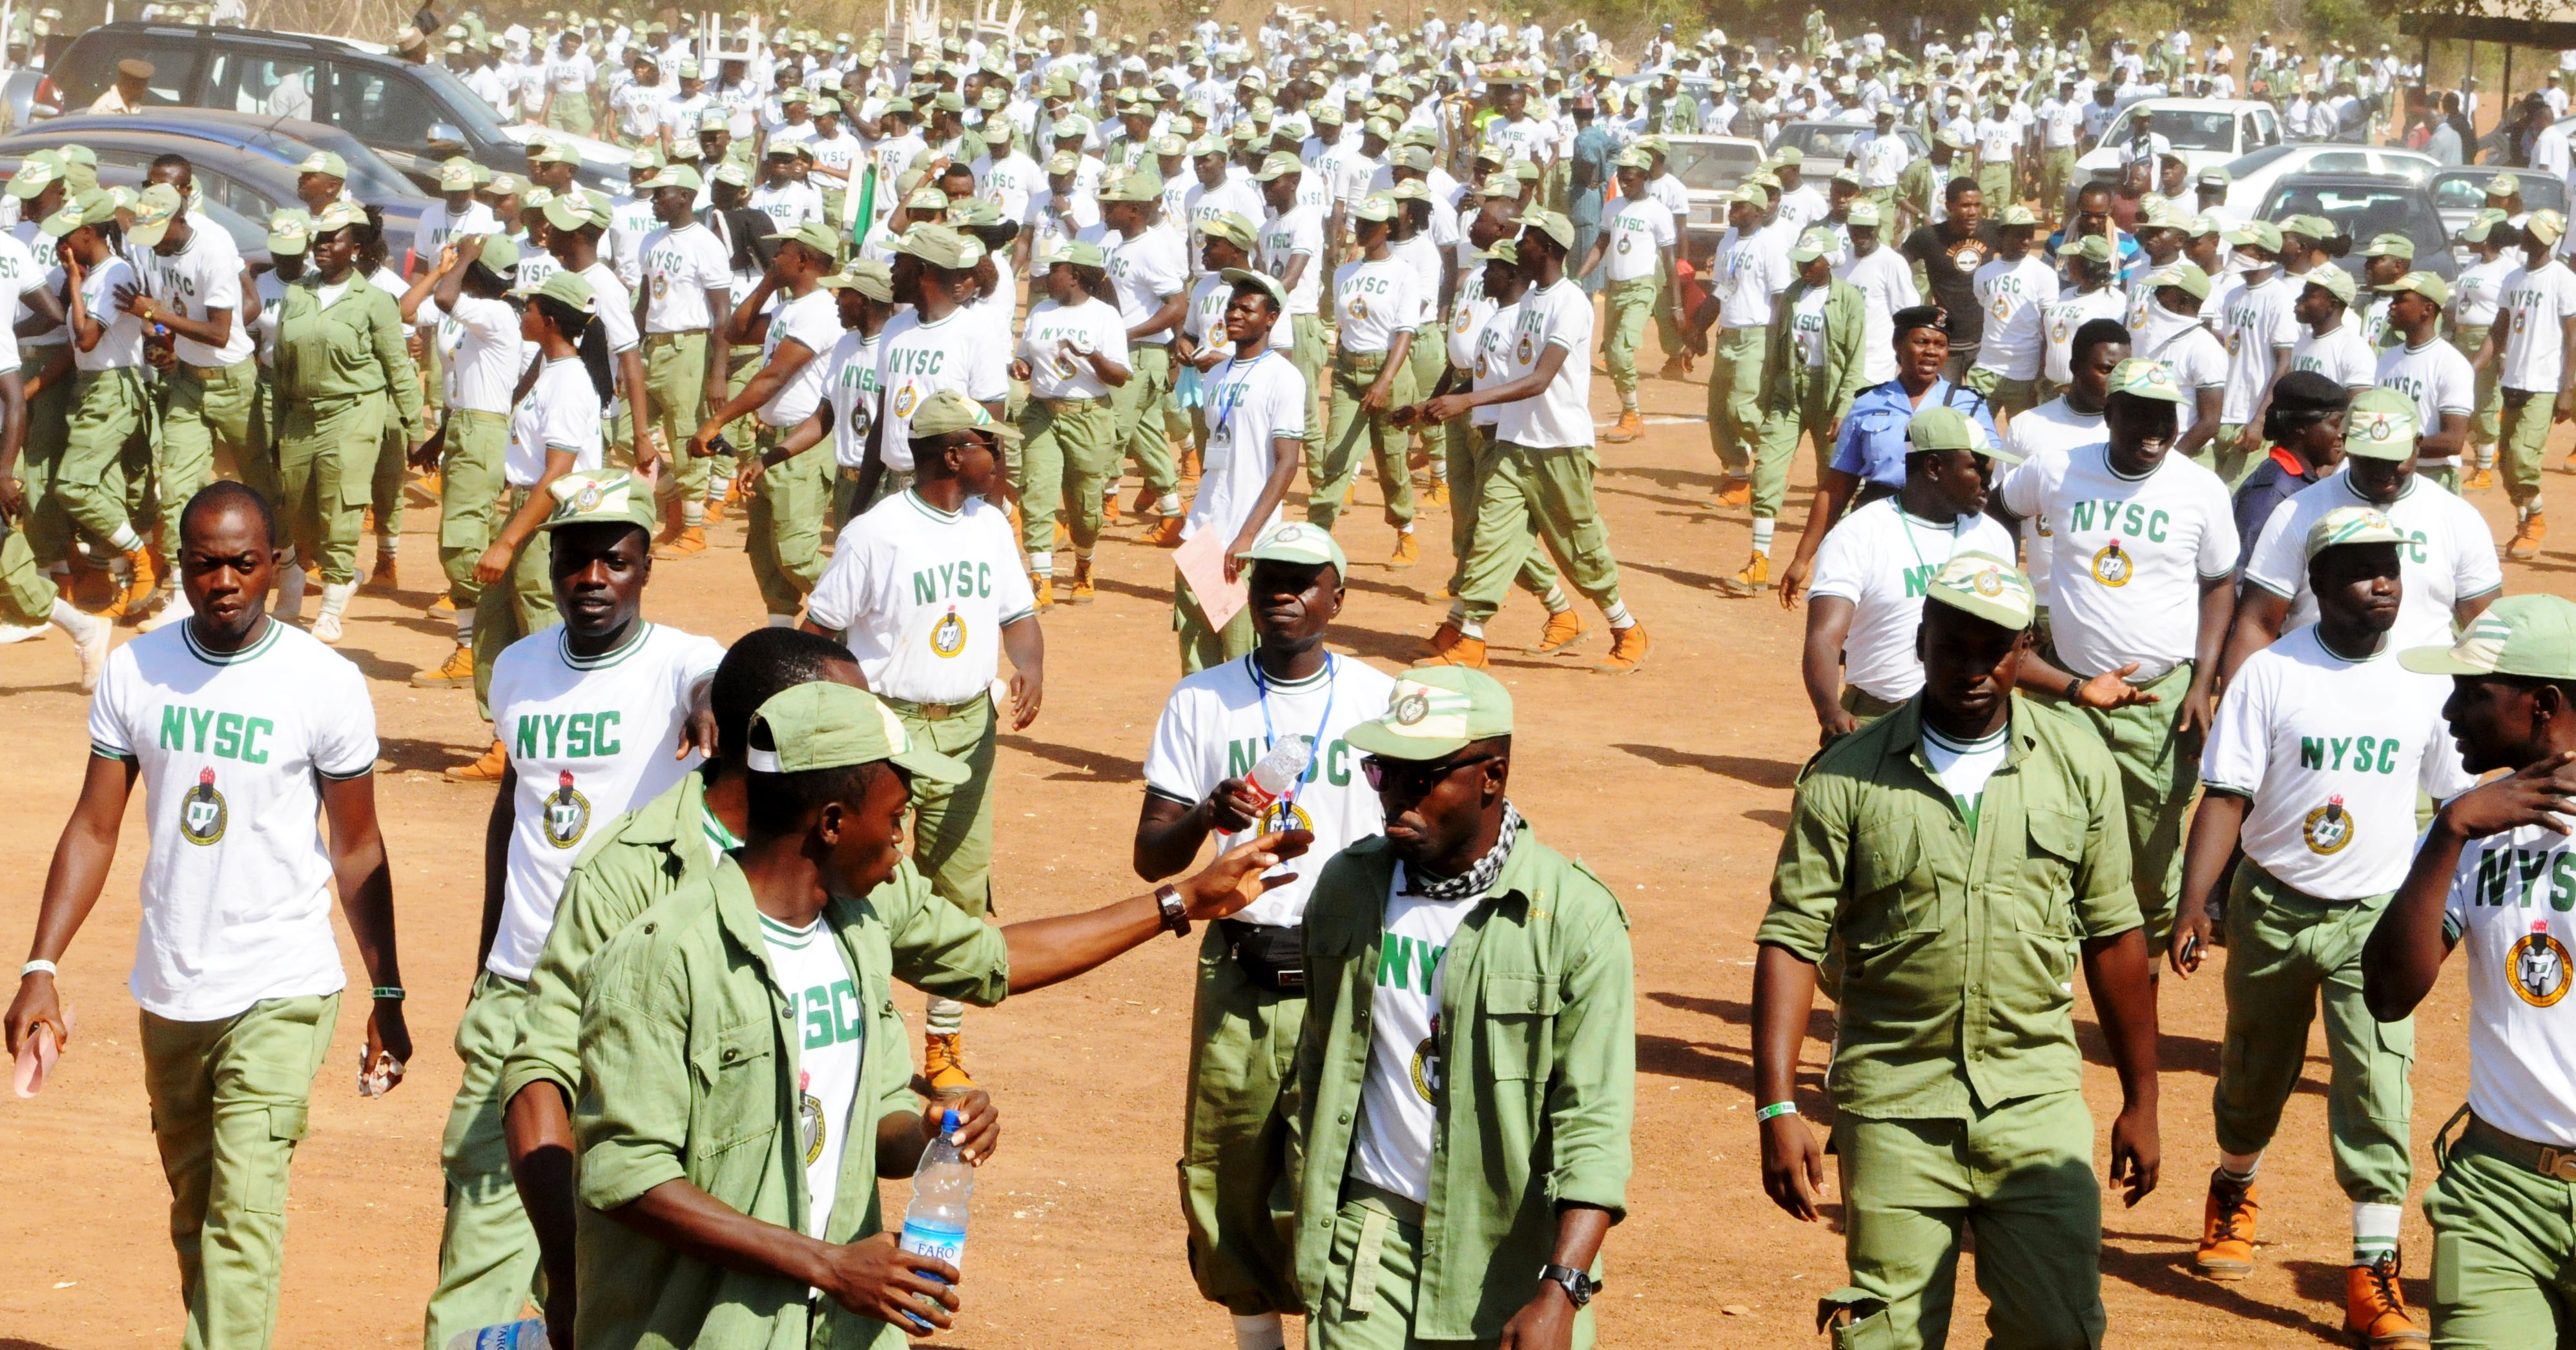 NYSC: Changes In Date Of Graduation, Courses Will No Longer Be Effected On Certificate